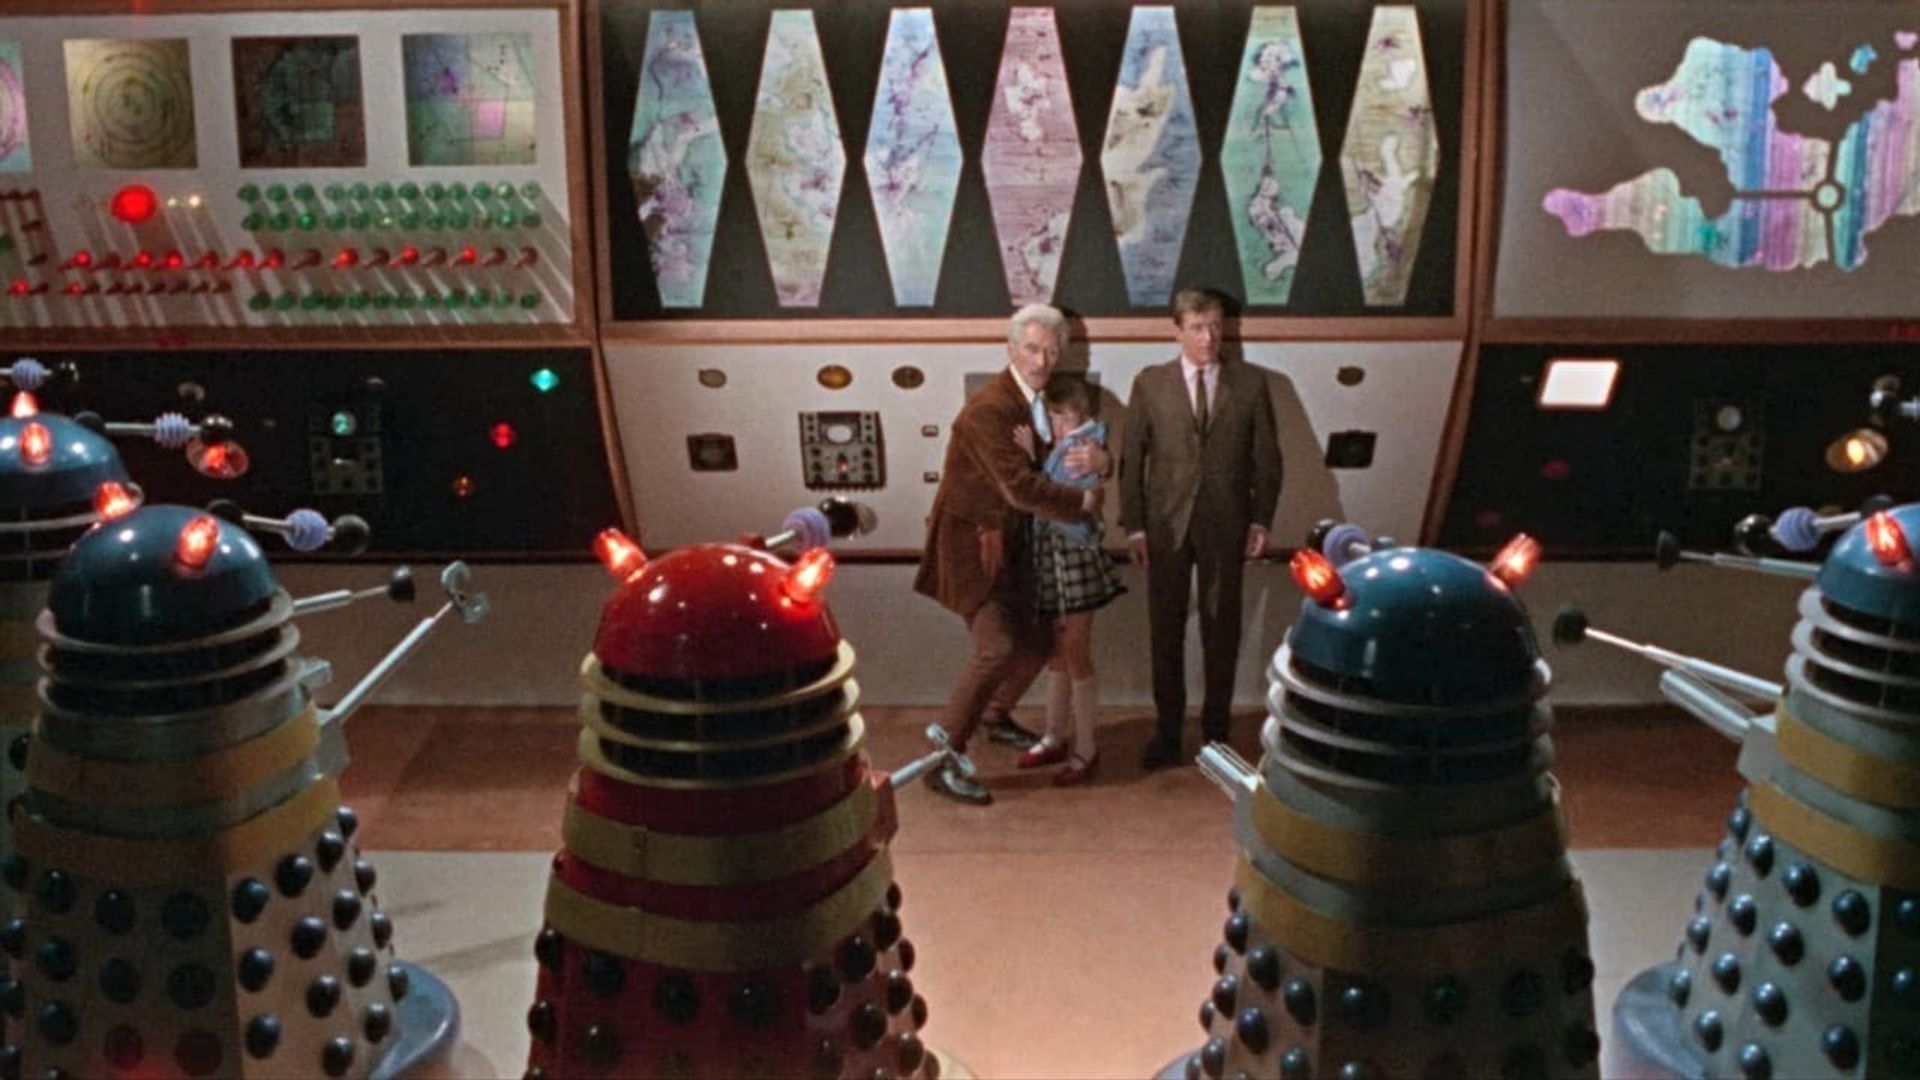 Dr. Who and the Daleks Backdrop